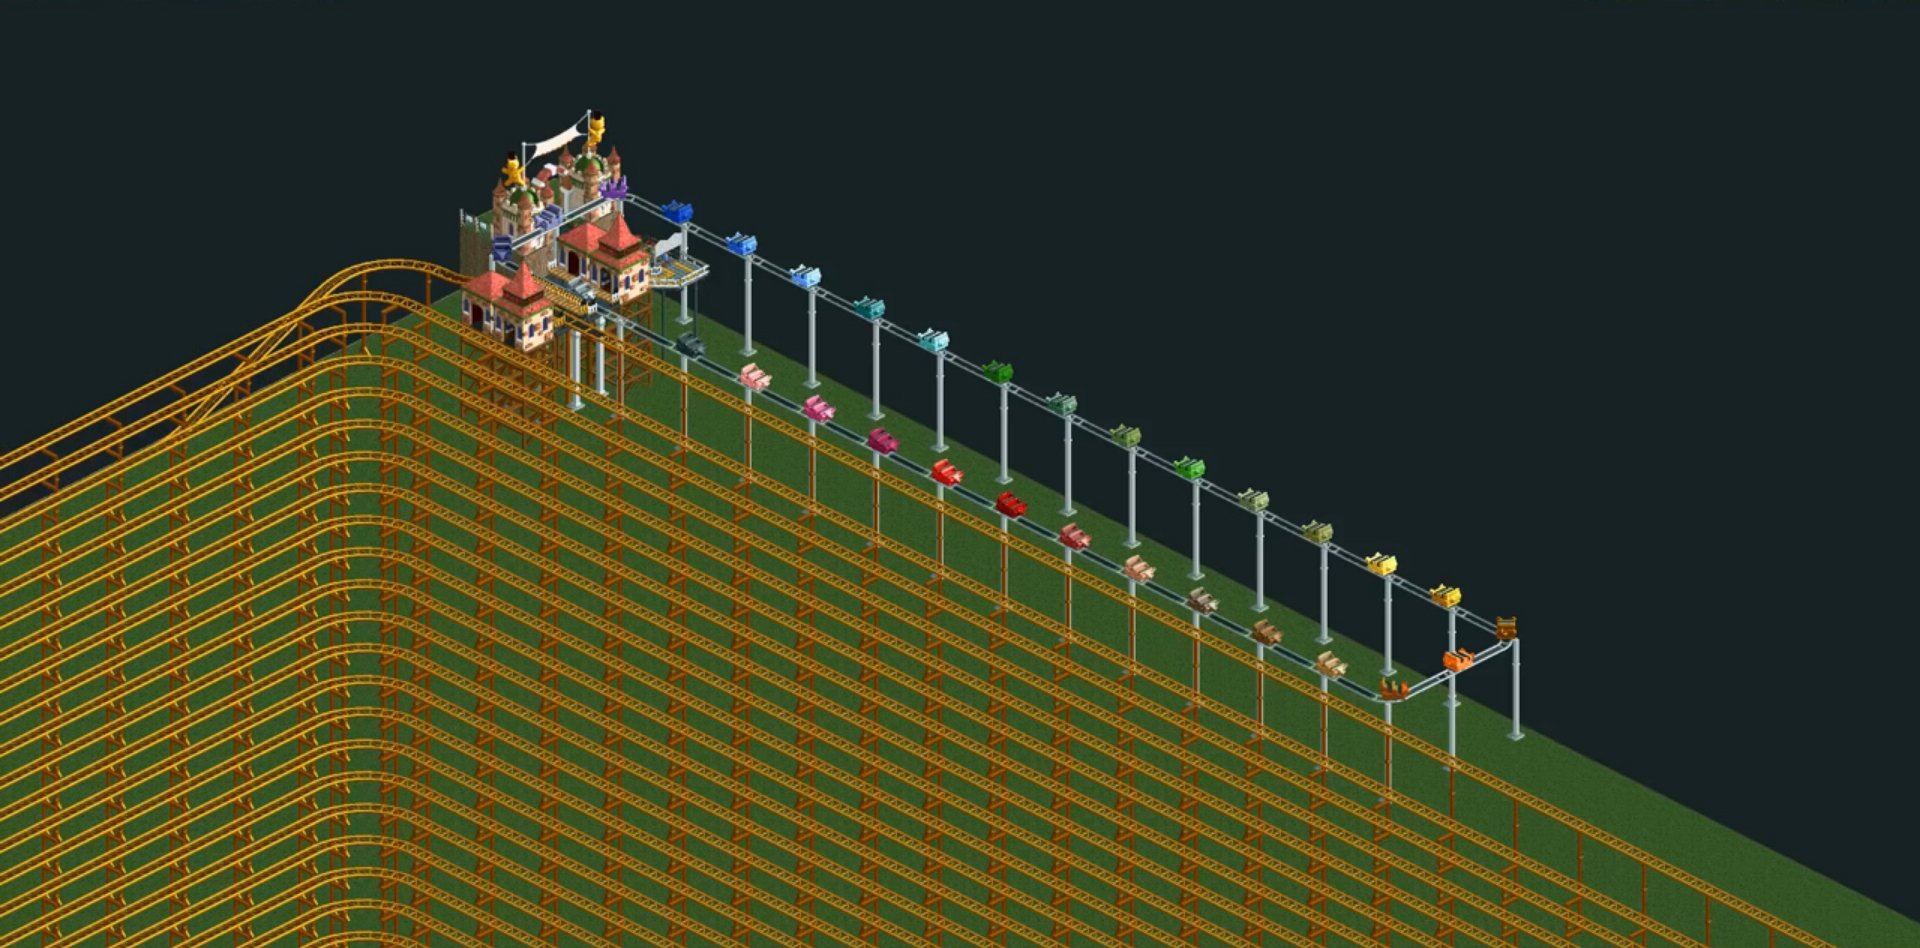 Roller Coaster Tycoon 2 time Twister. Аттракцион Roller Tycoon 1 заставка. Rct2.